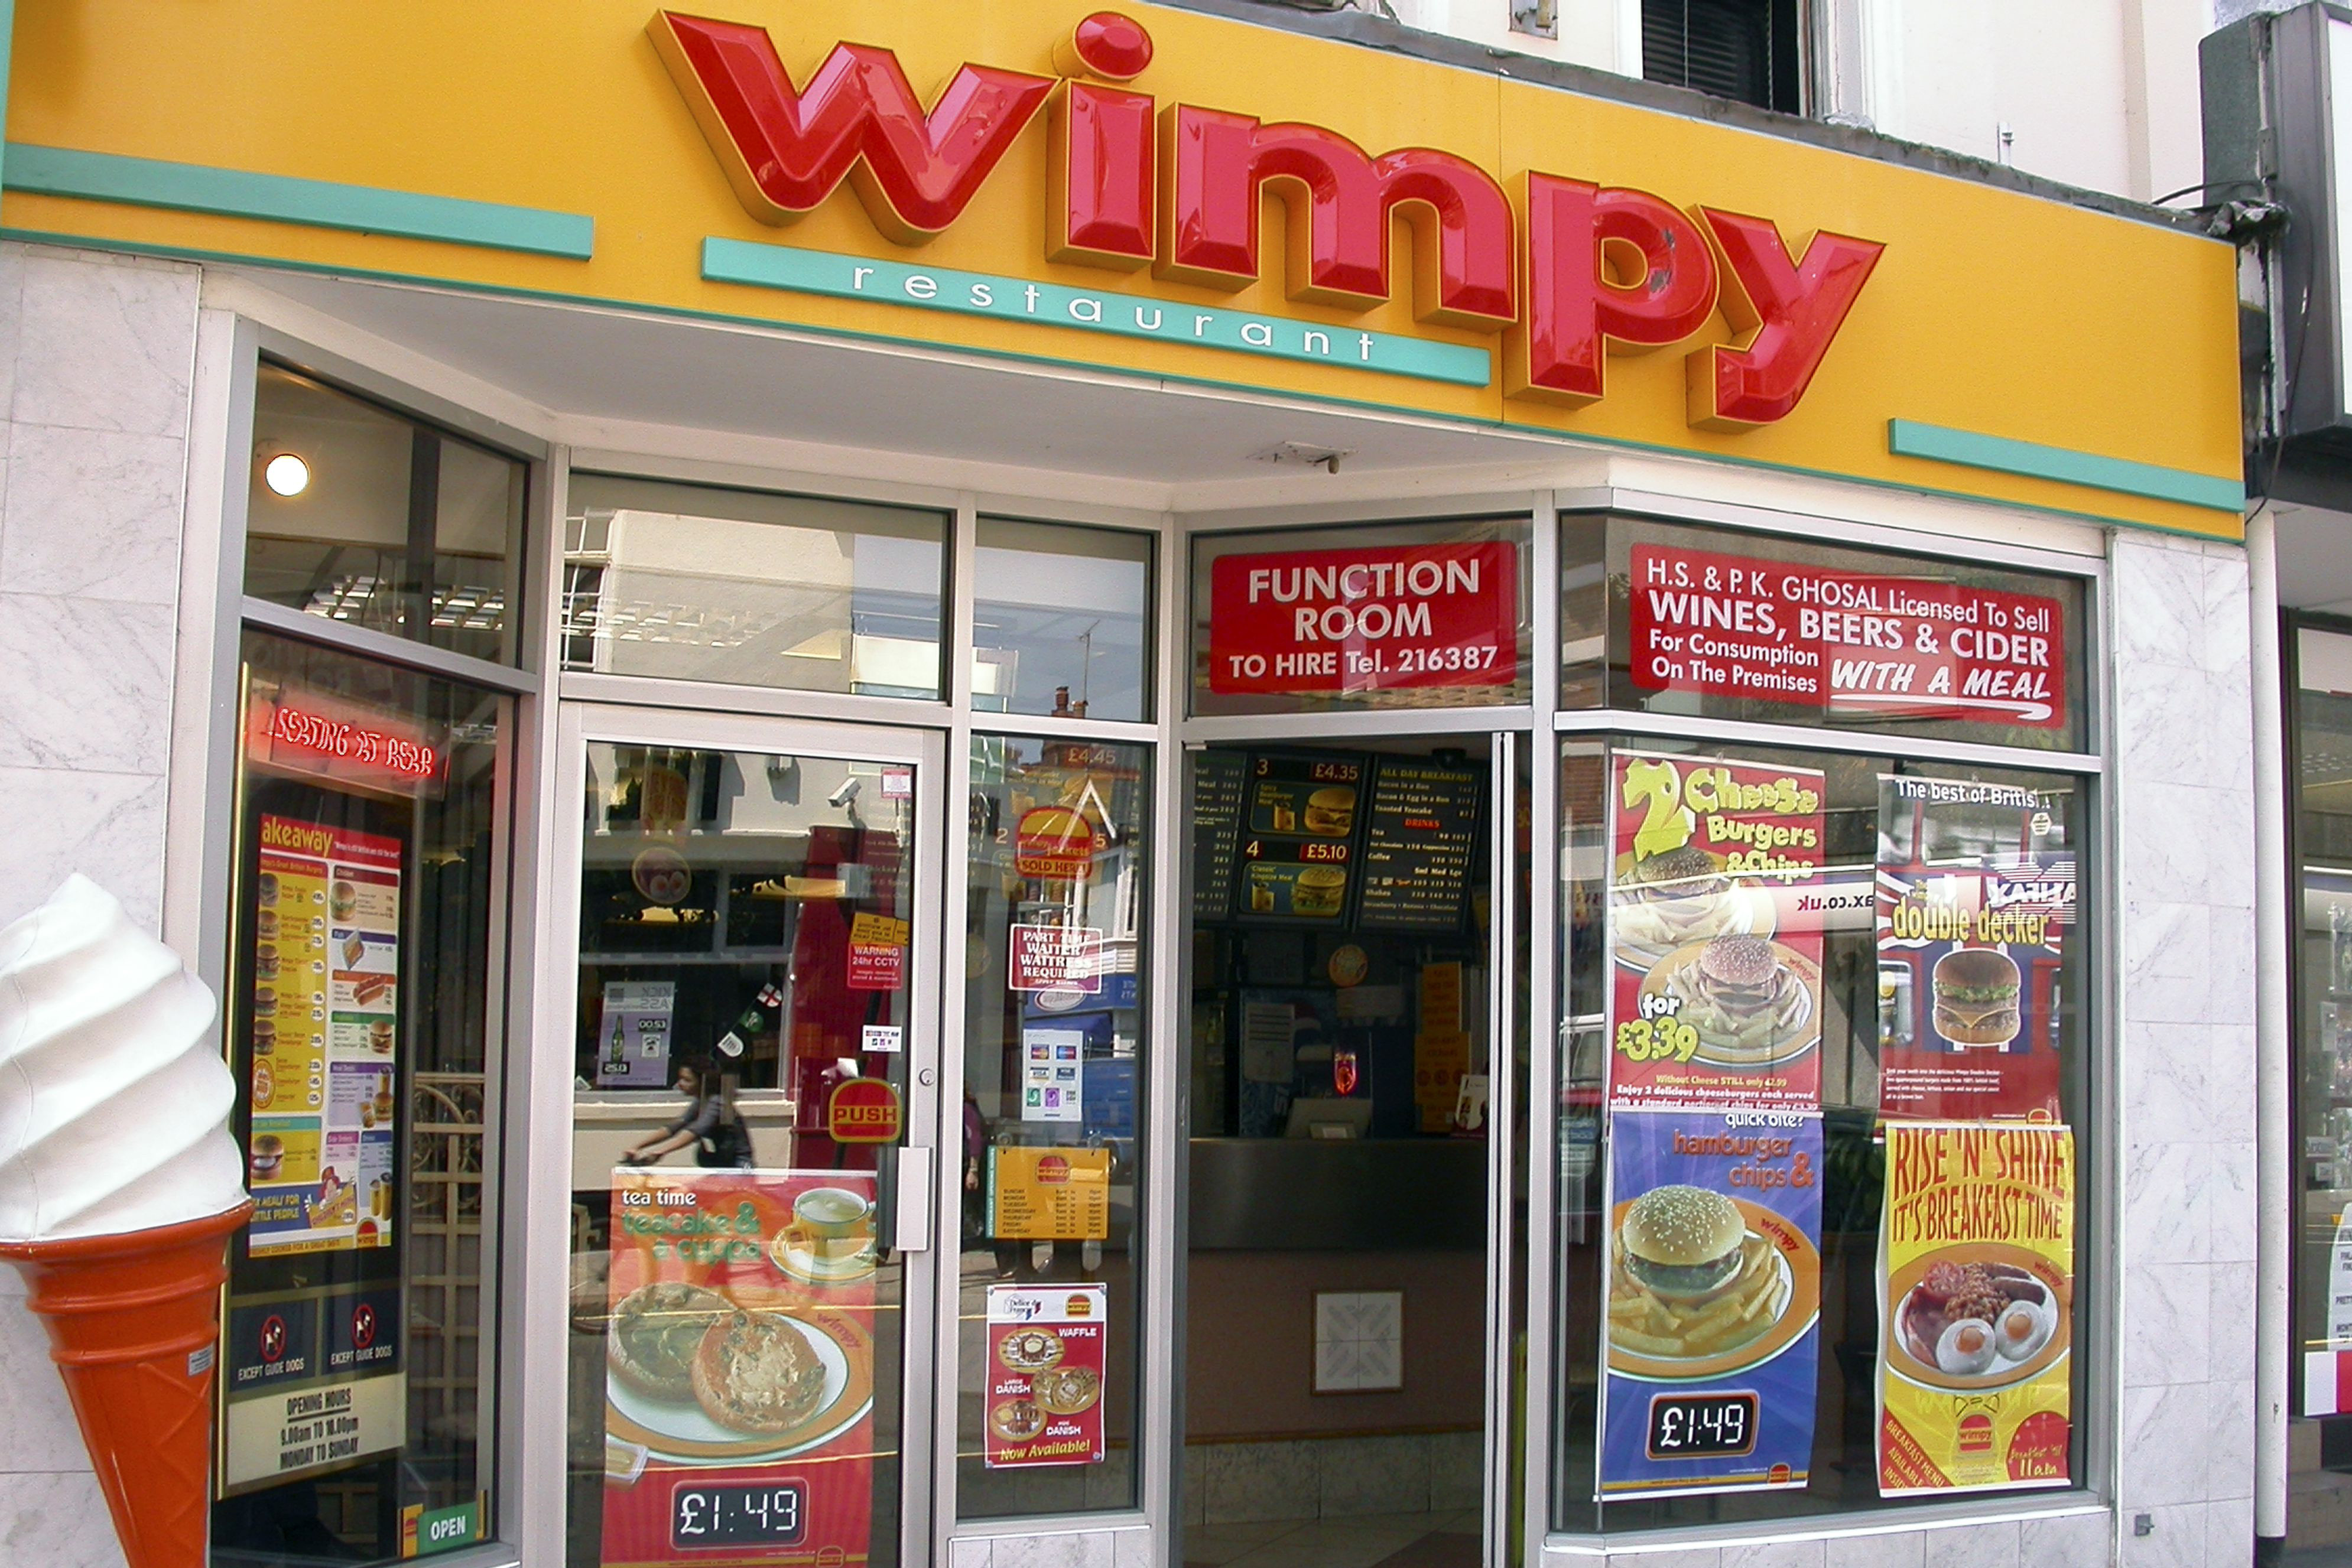 Wimpy said a statement on its UK egg policy that it took animal welfare issues very seriously. Photo: Photofusion/REX/Shutterstock